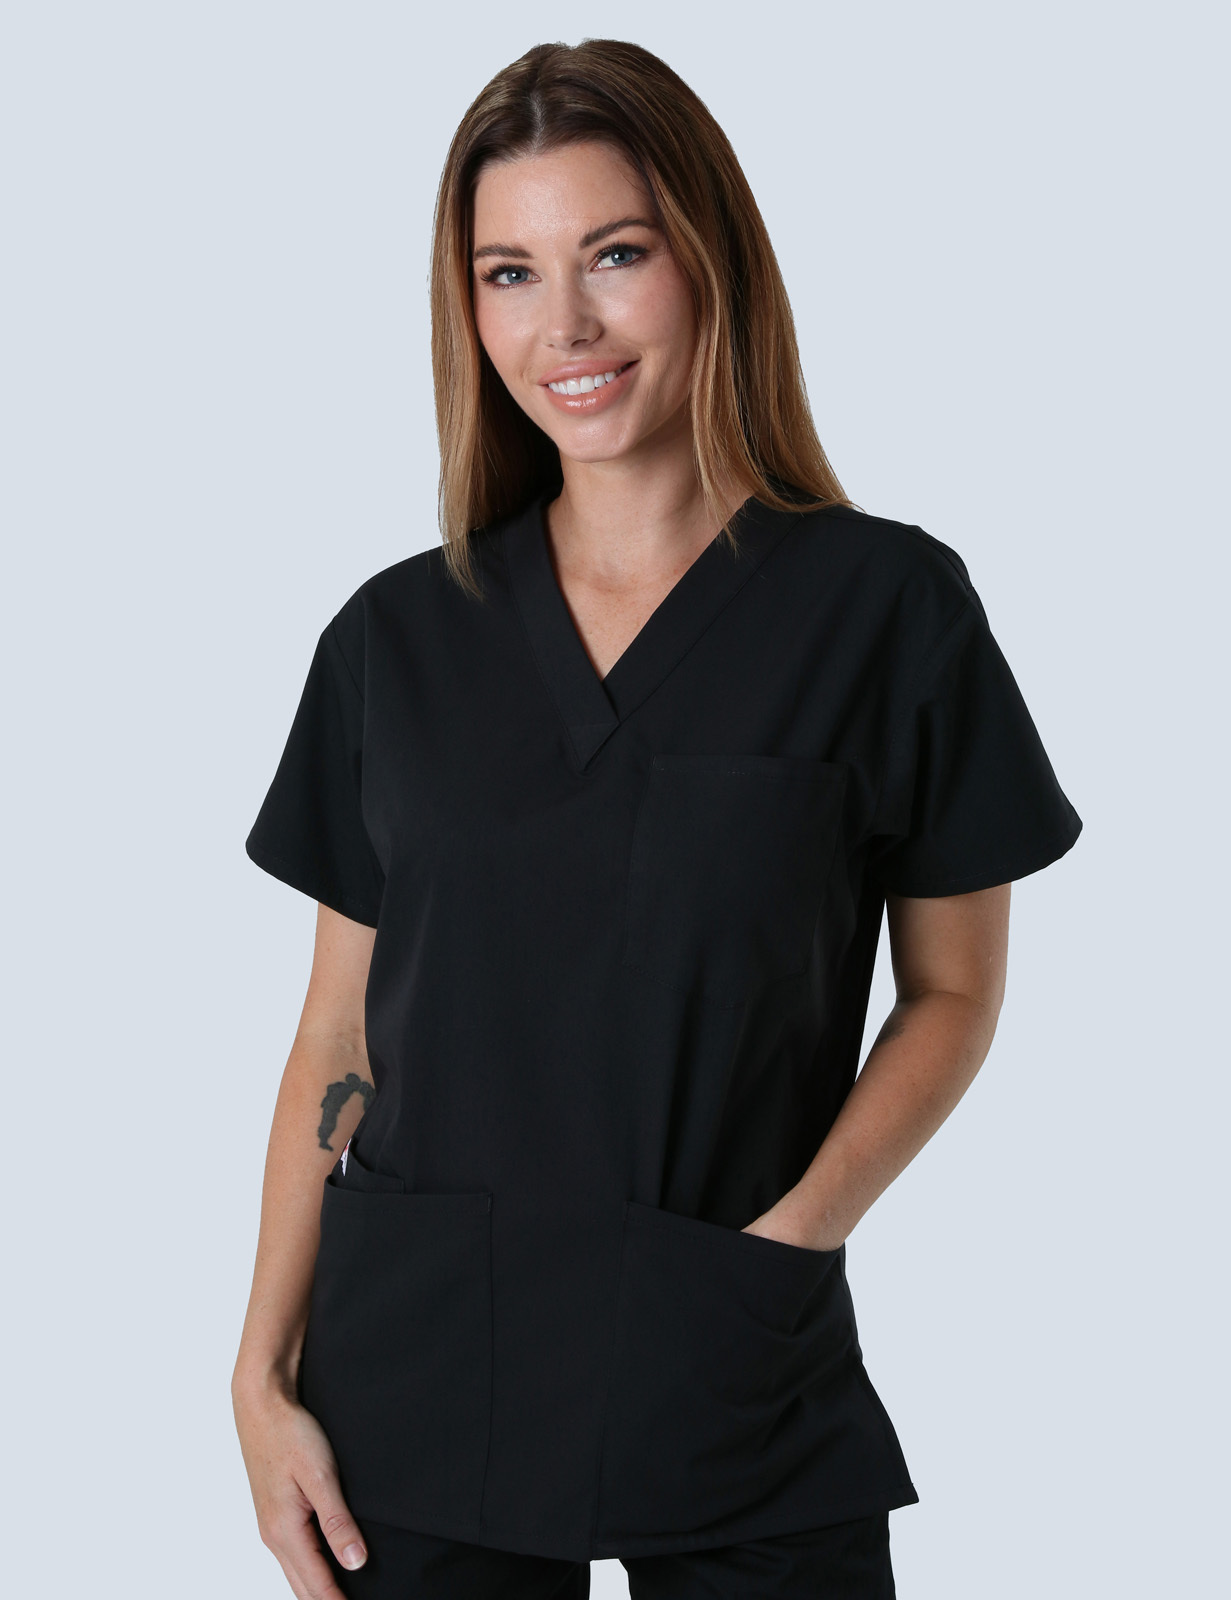 Canberra Hospital - Doctors (4 Pocket Scrub Top and Cargo Pants in Black incl Logos)